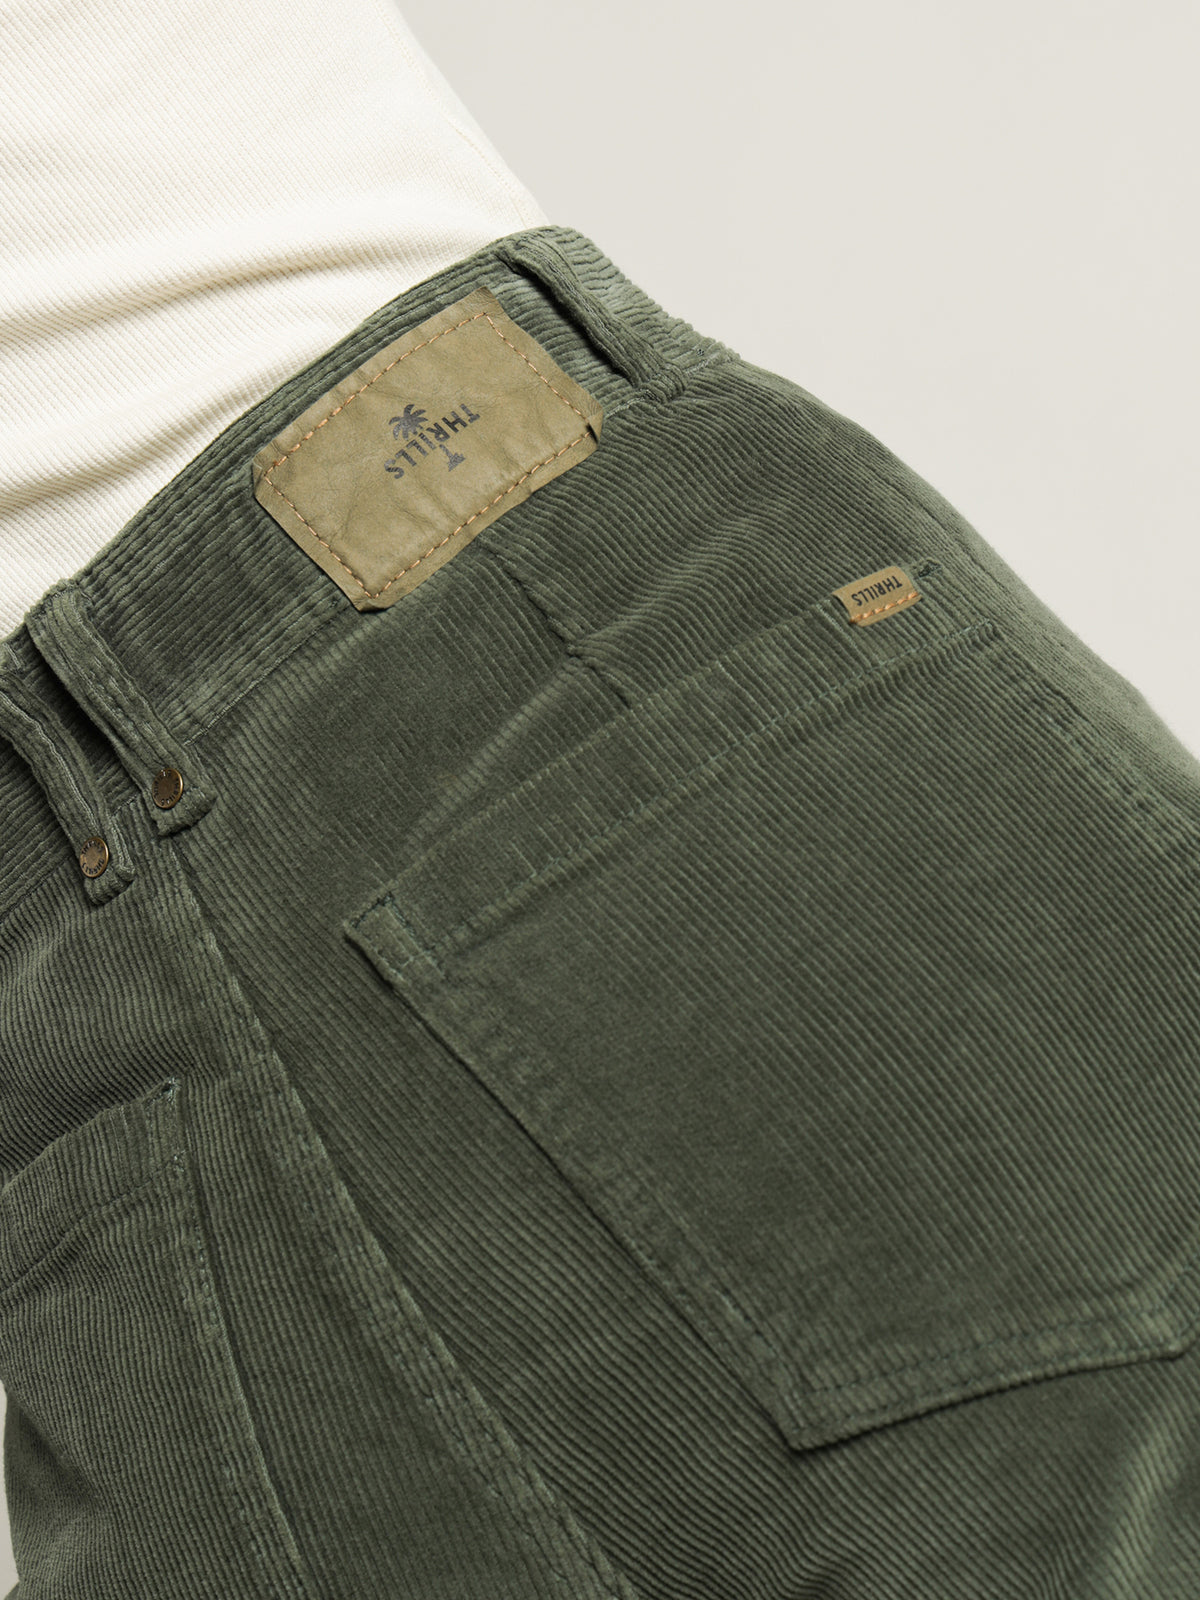 Belle Cord Pants in Lume Green